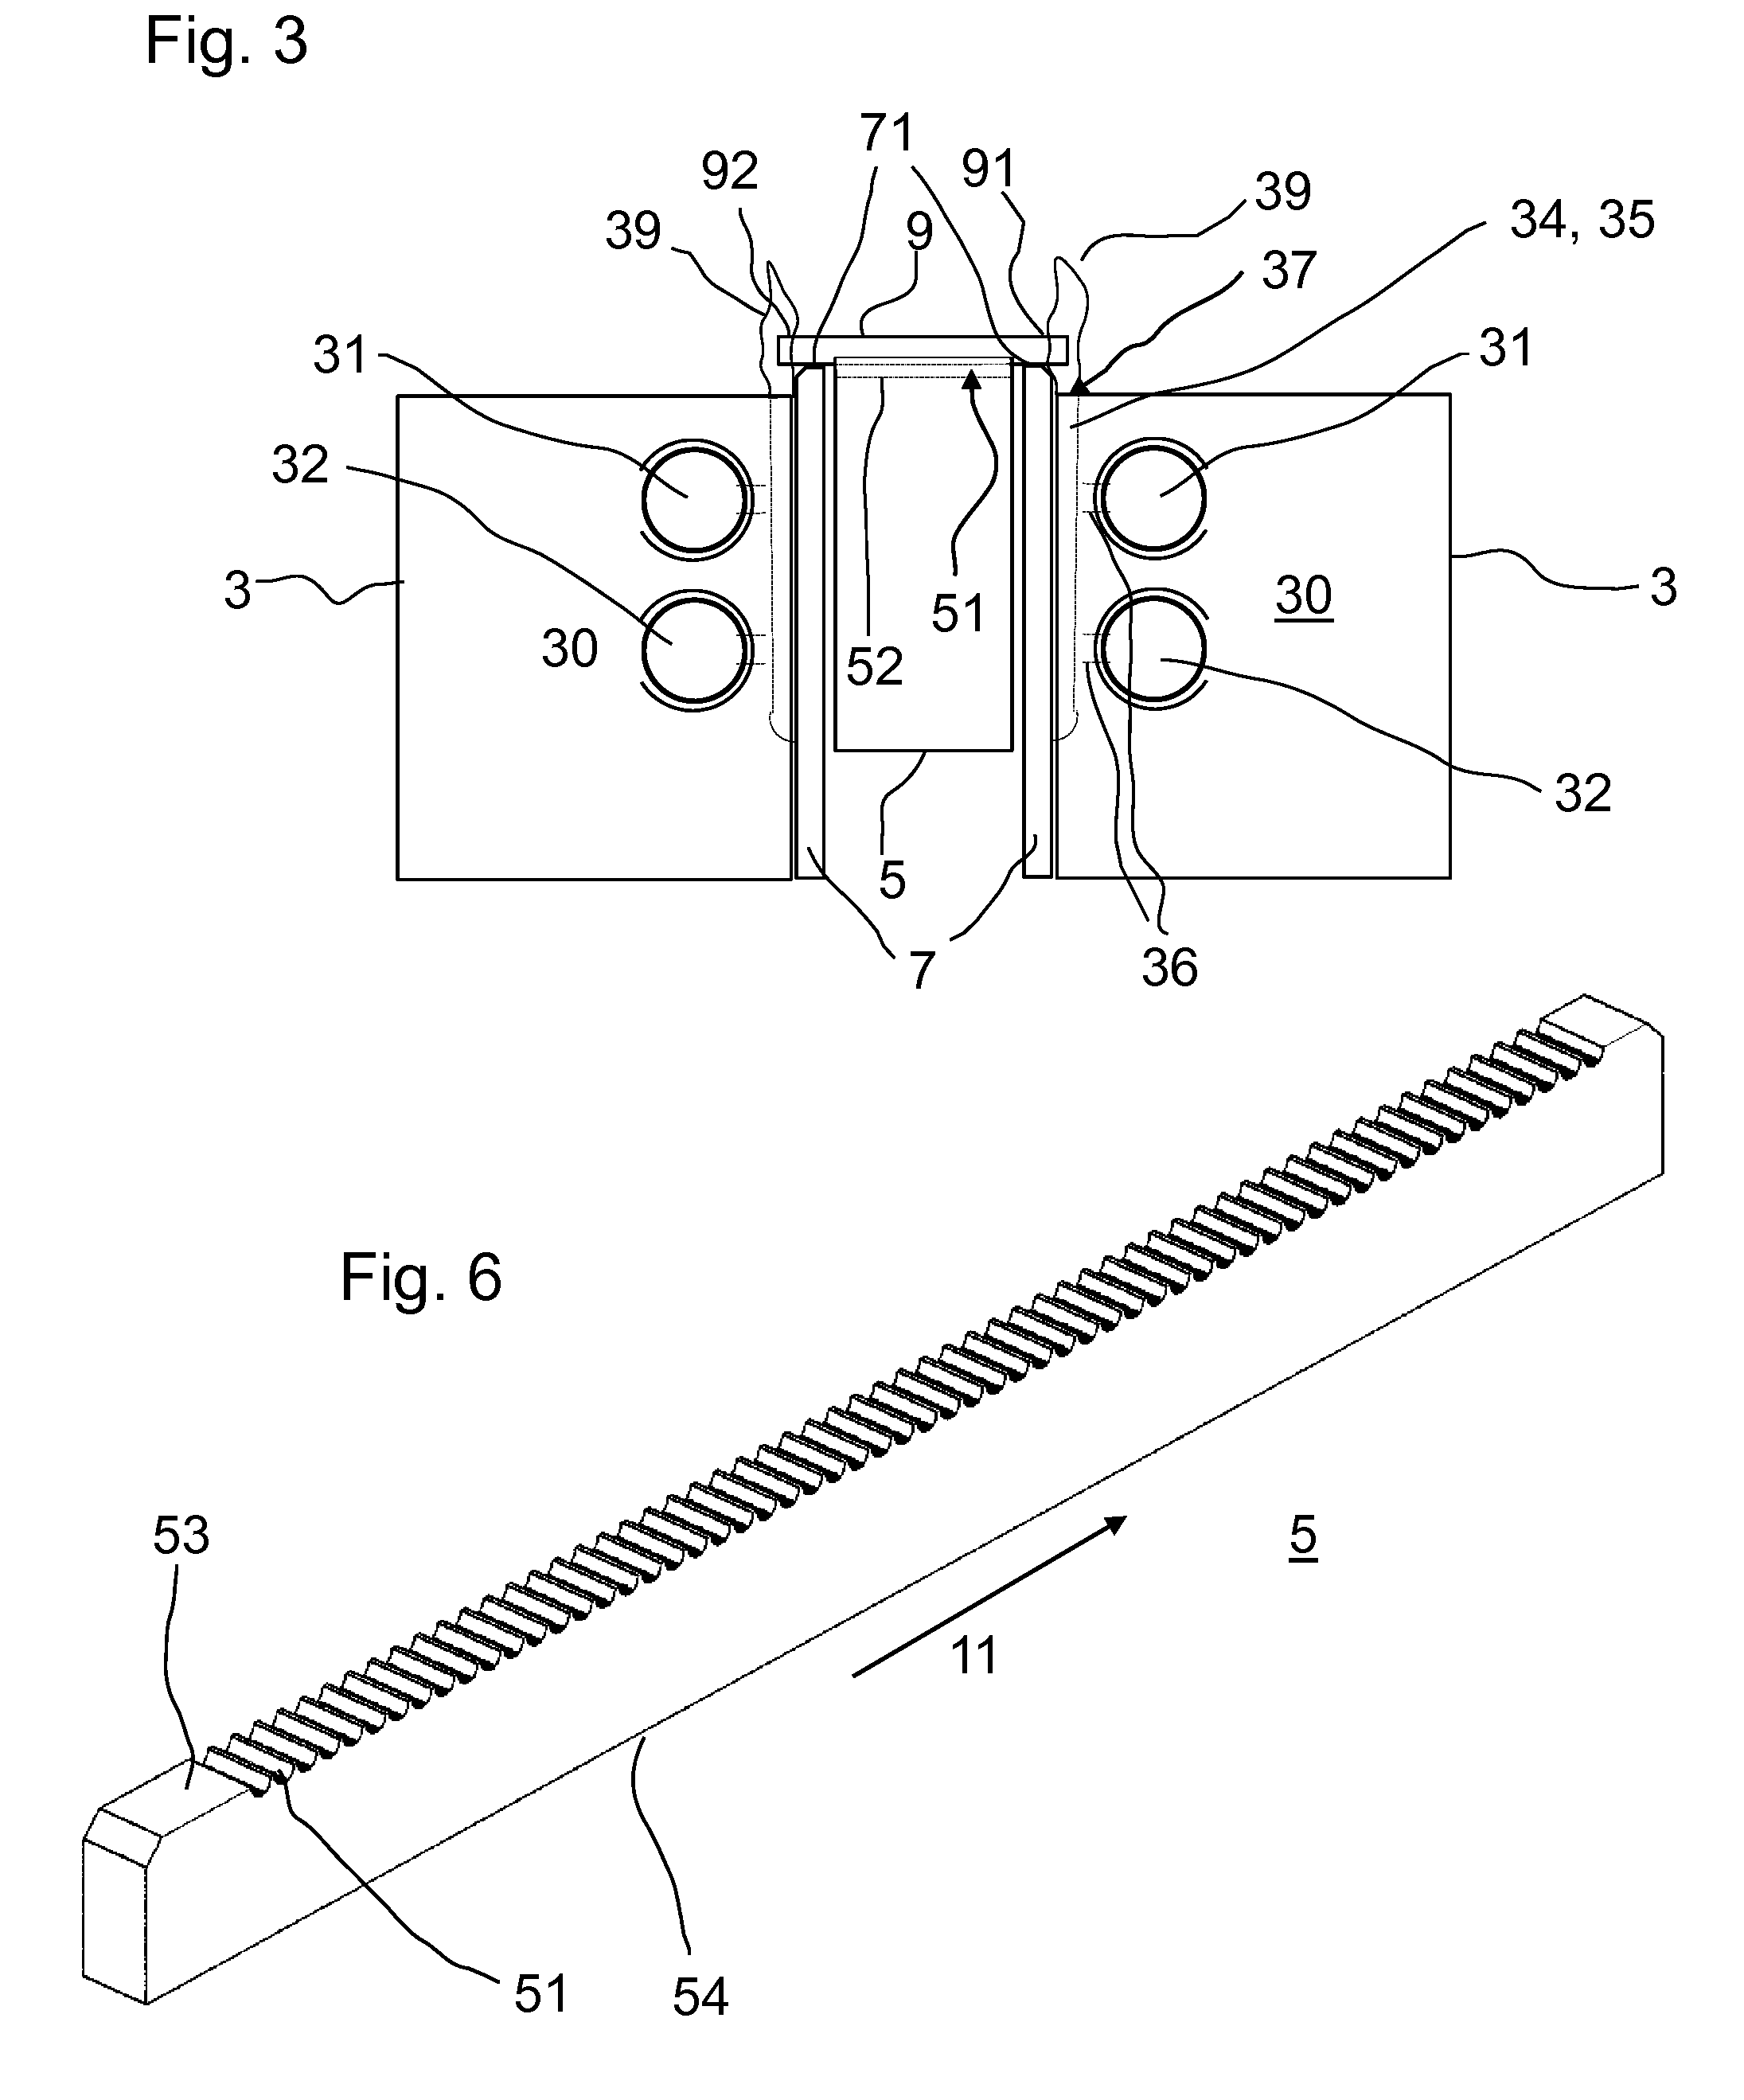 Method and device for melting the ends of rods